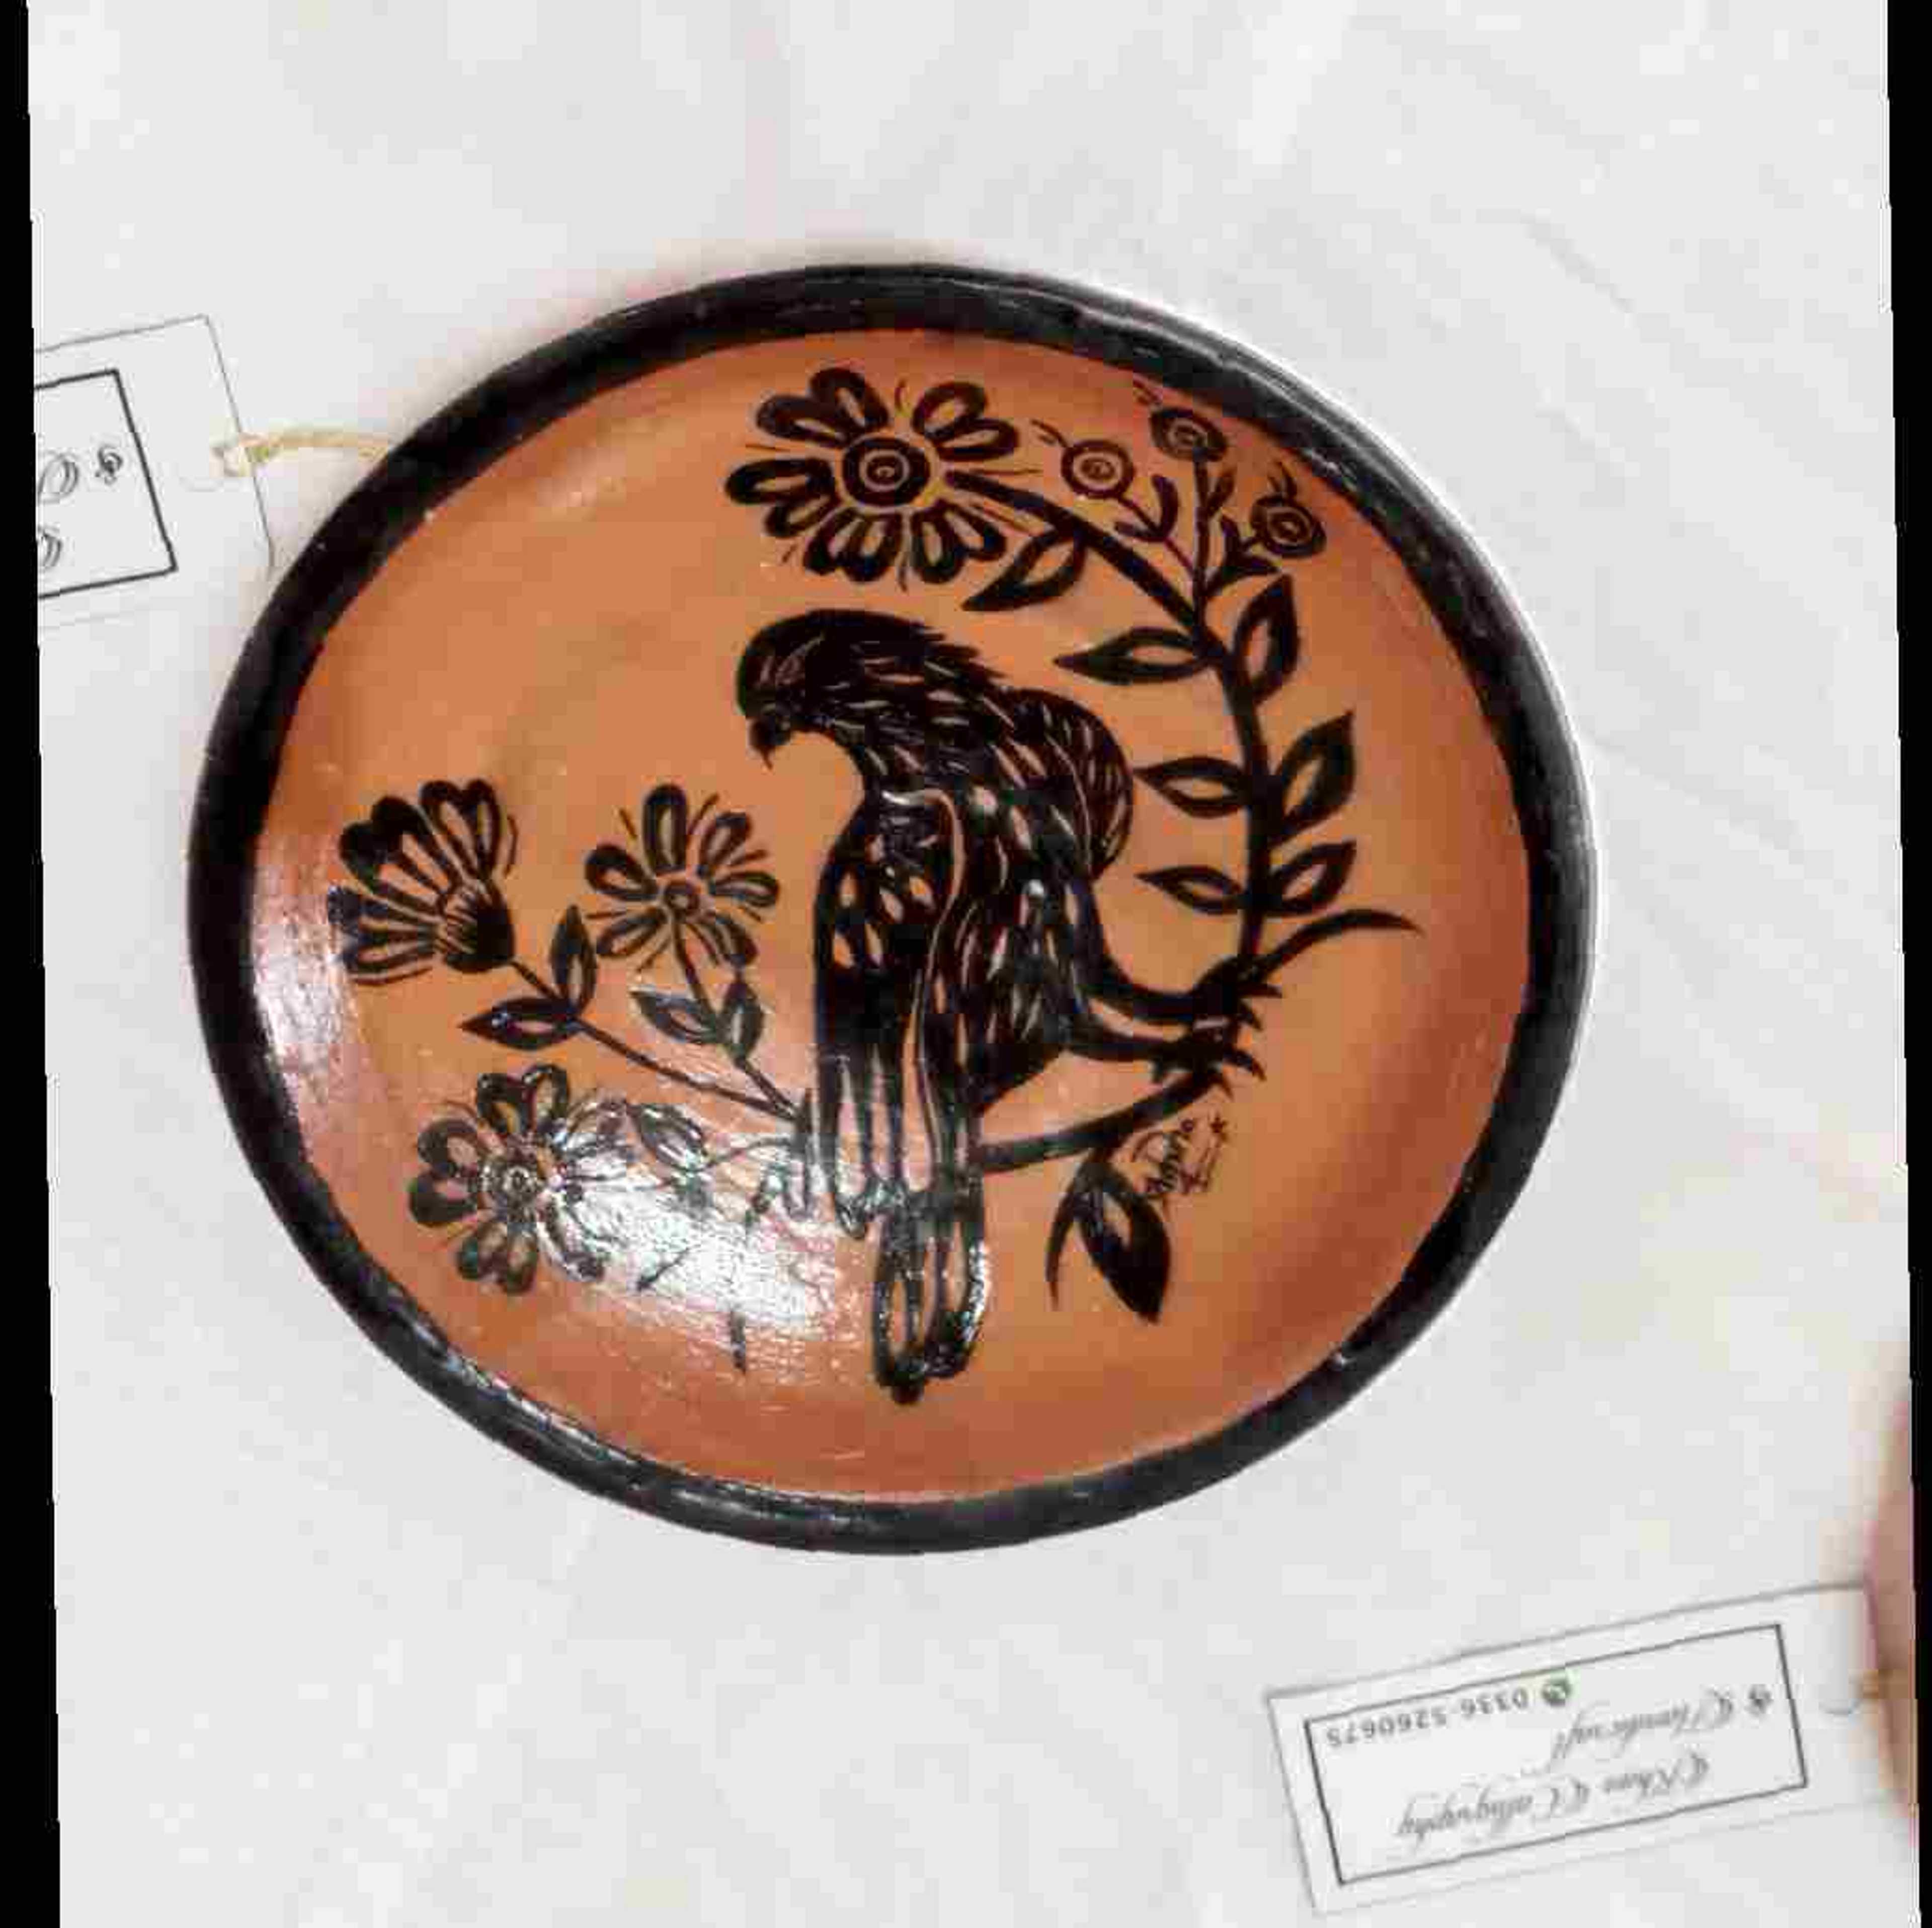 Hand Painted Clay Plate "Eagle"